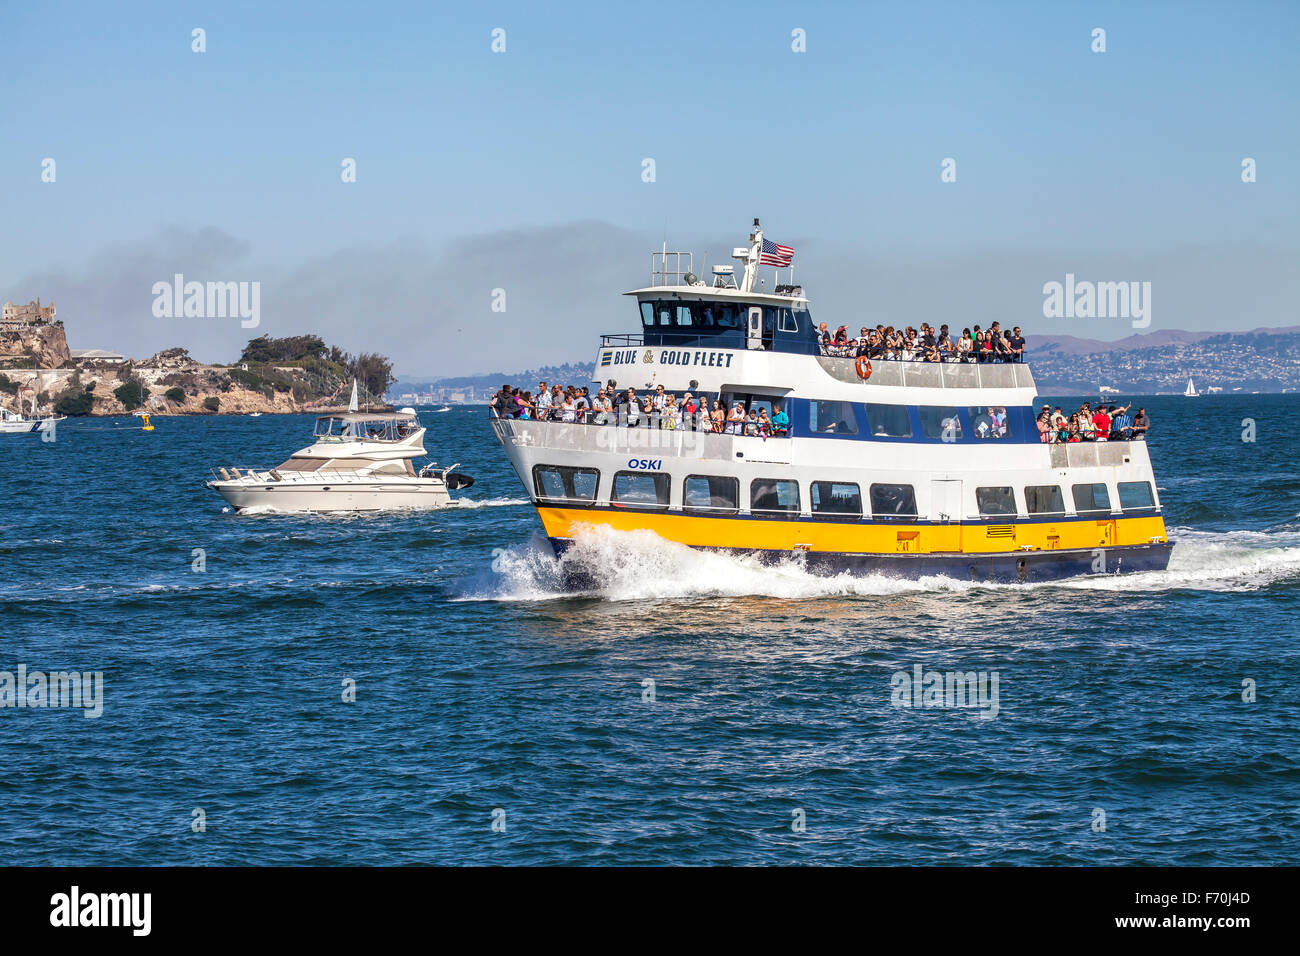 The Blue and Gold ferry transporting passengers across the San Francisco Bay, San Francisco, California, USA Stock Photo